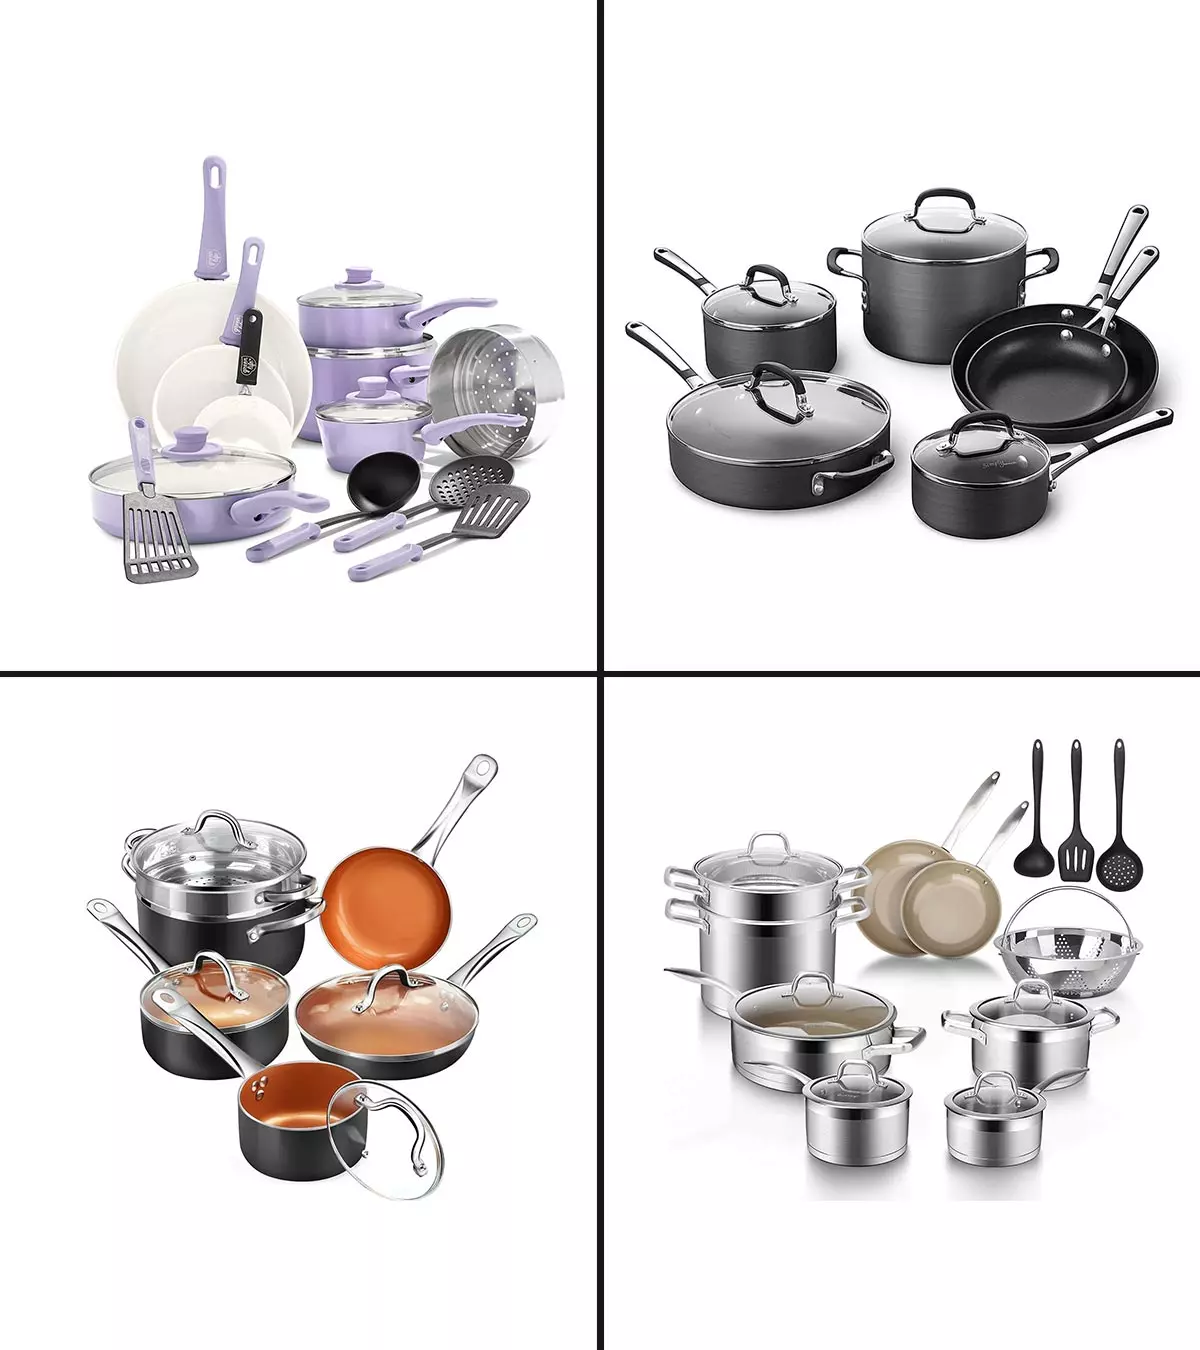 11 Best Cookware For Glass Top Stove In 2021